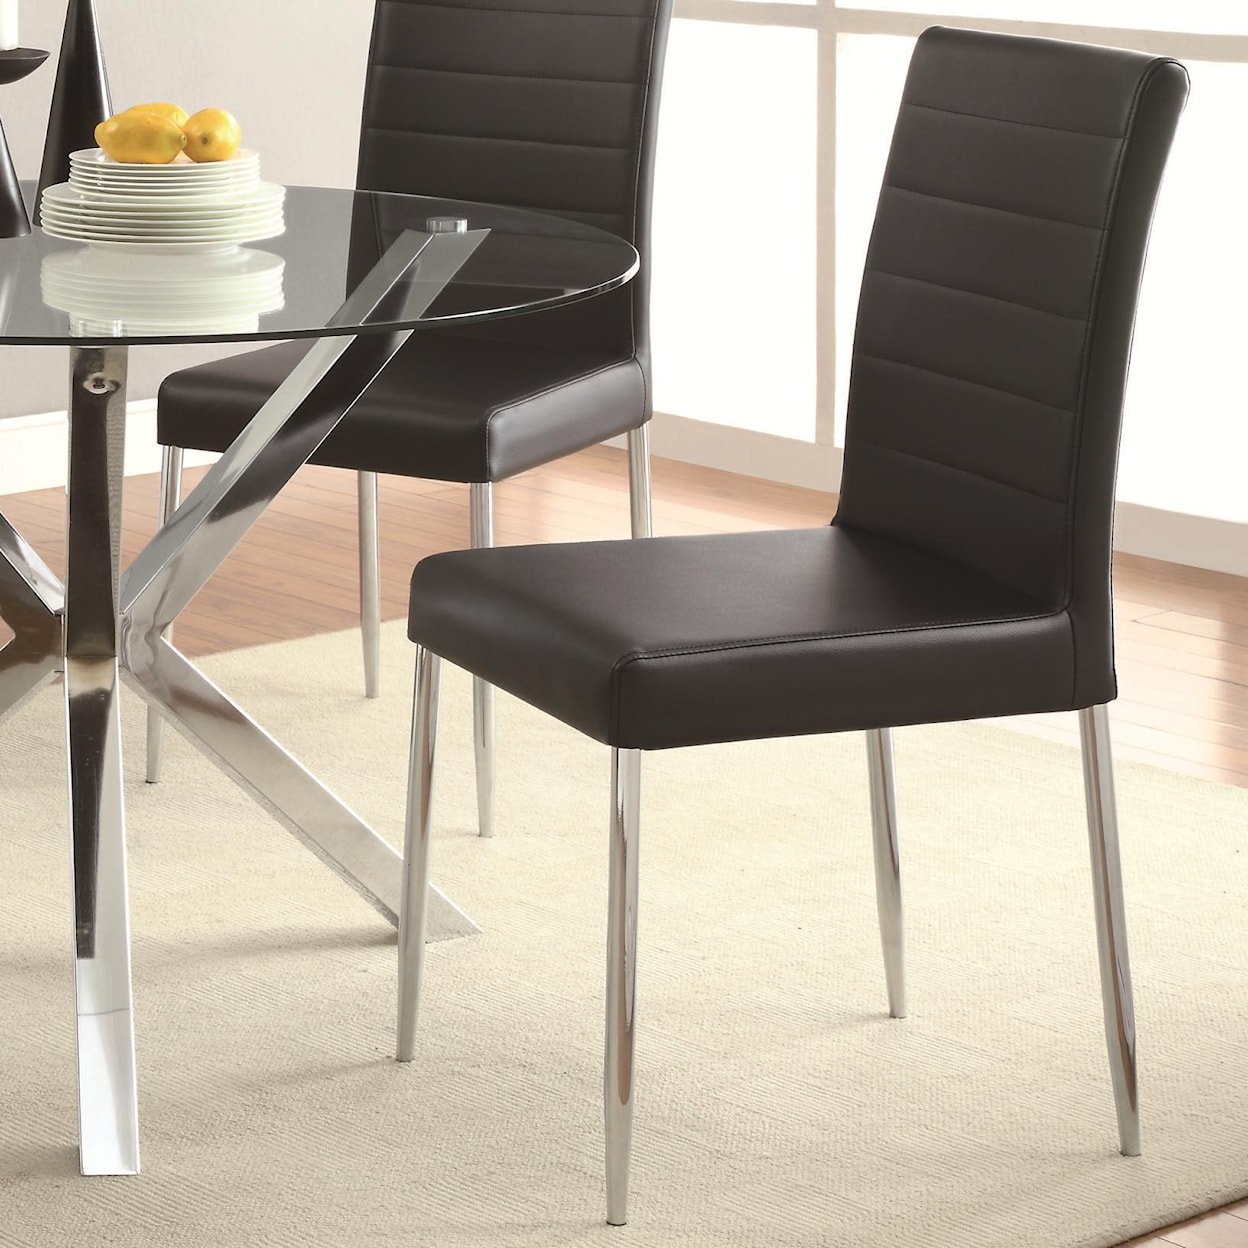 Coaster Vance 5pc Dining Room Group